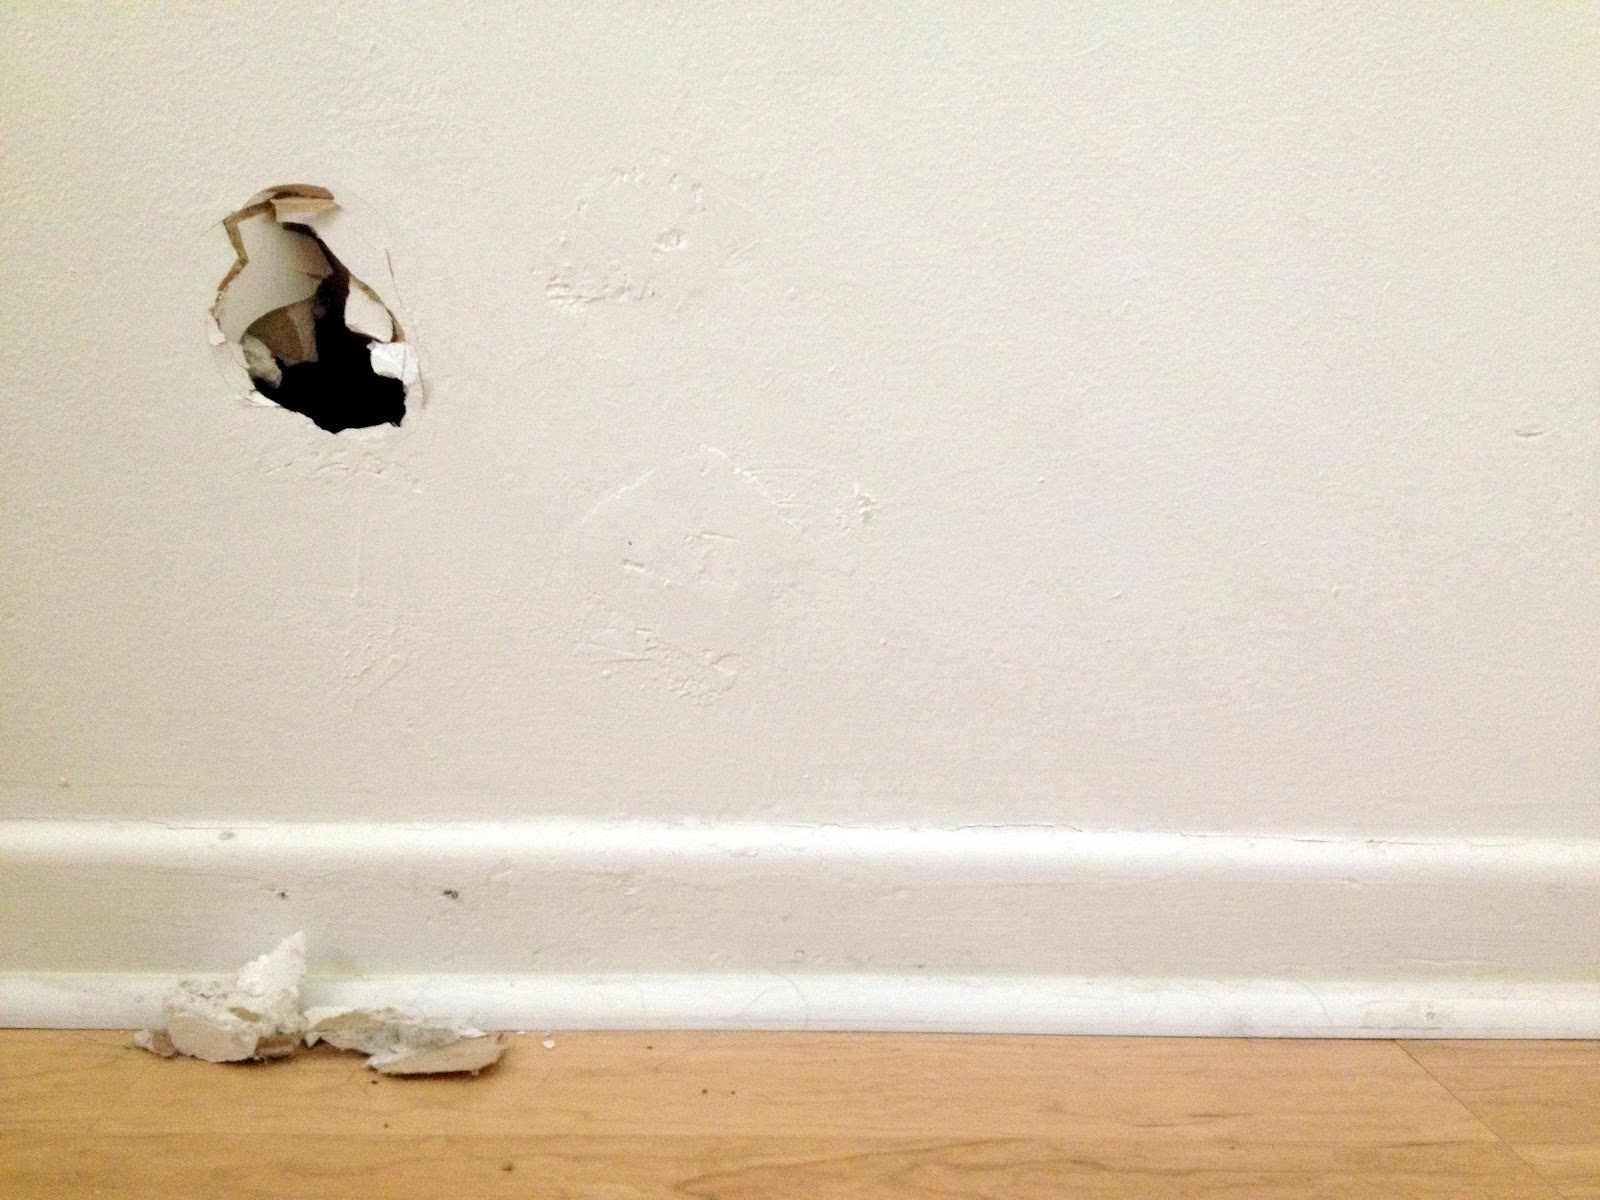 How To Fix A Hole In The Wall Materials And Best Tips Earlyexperts